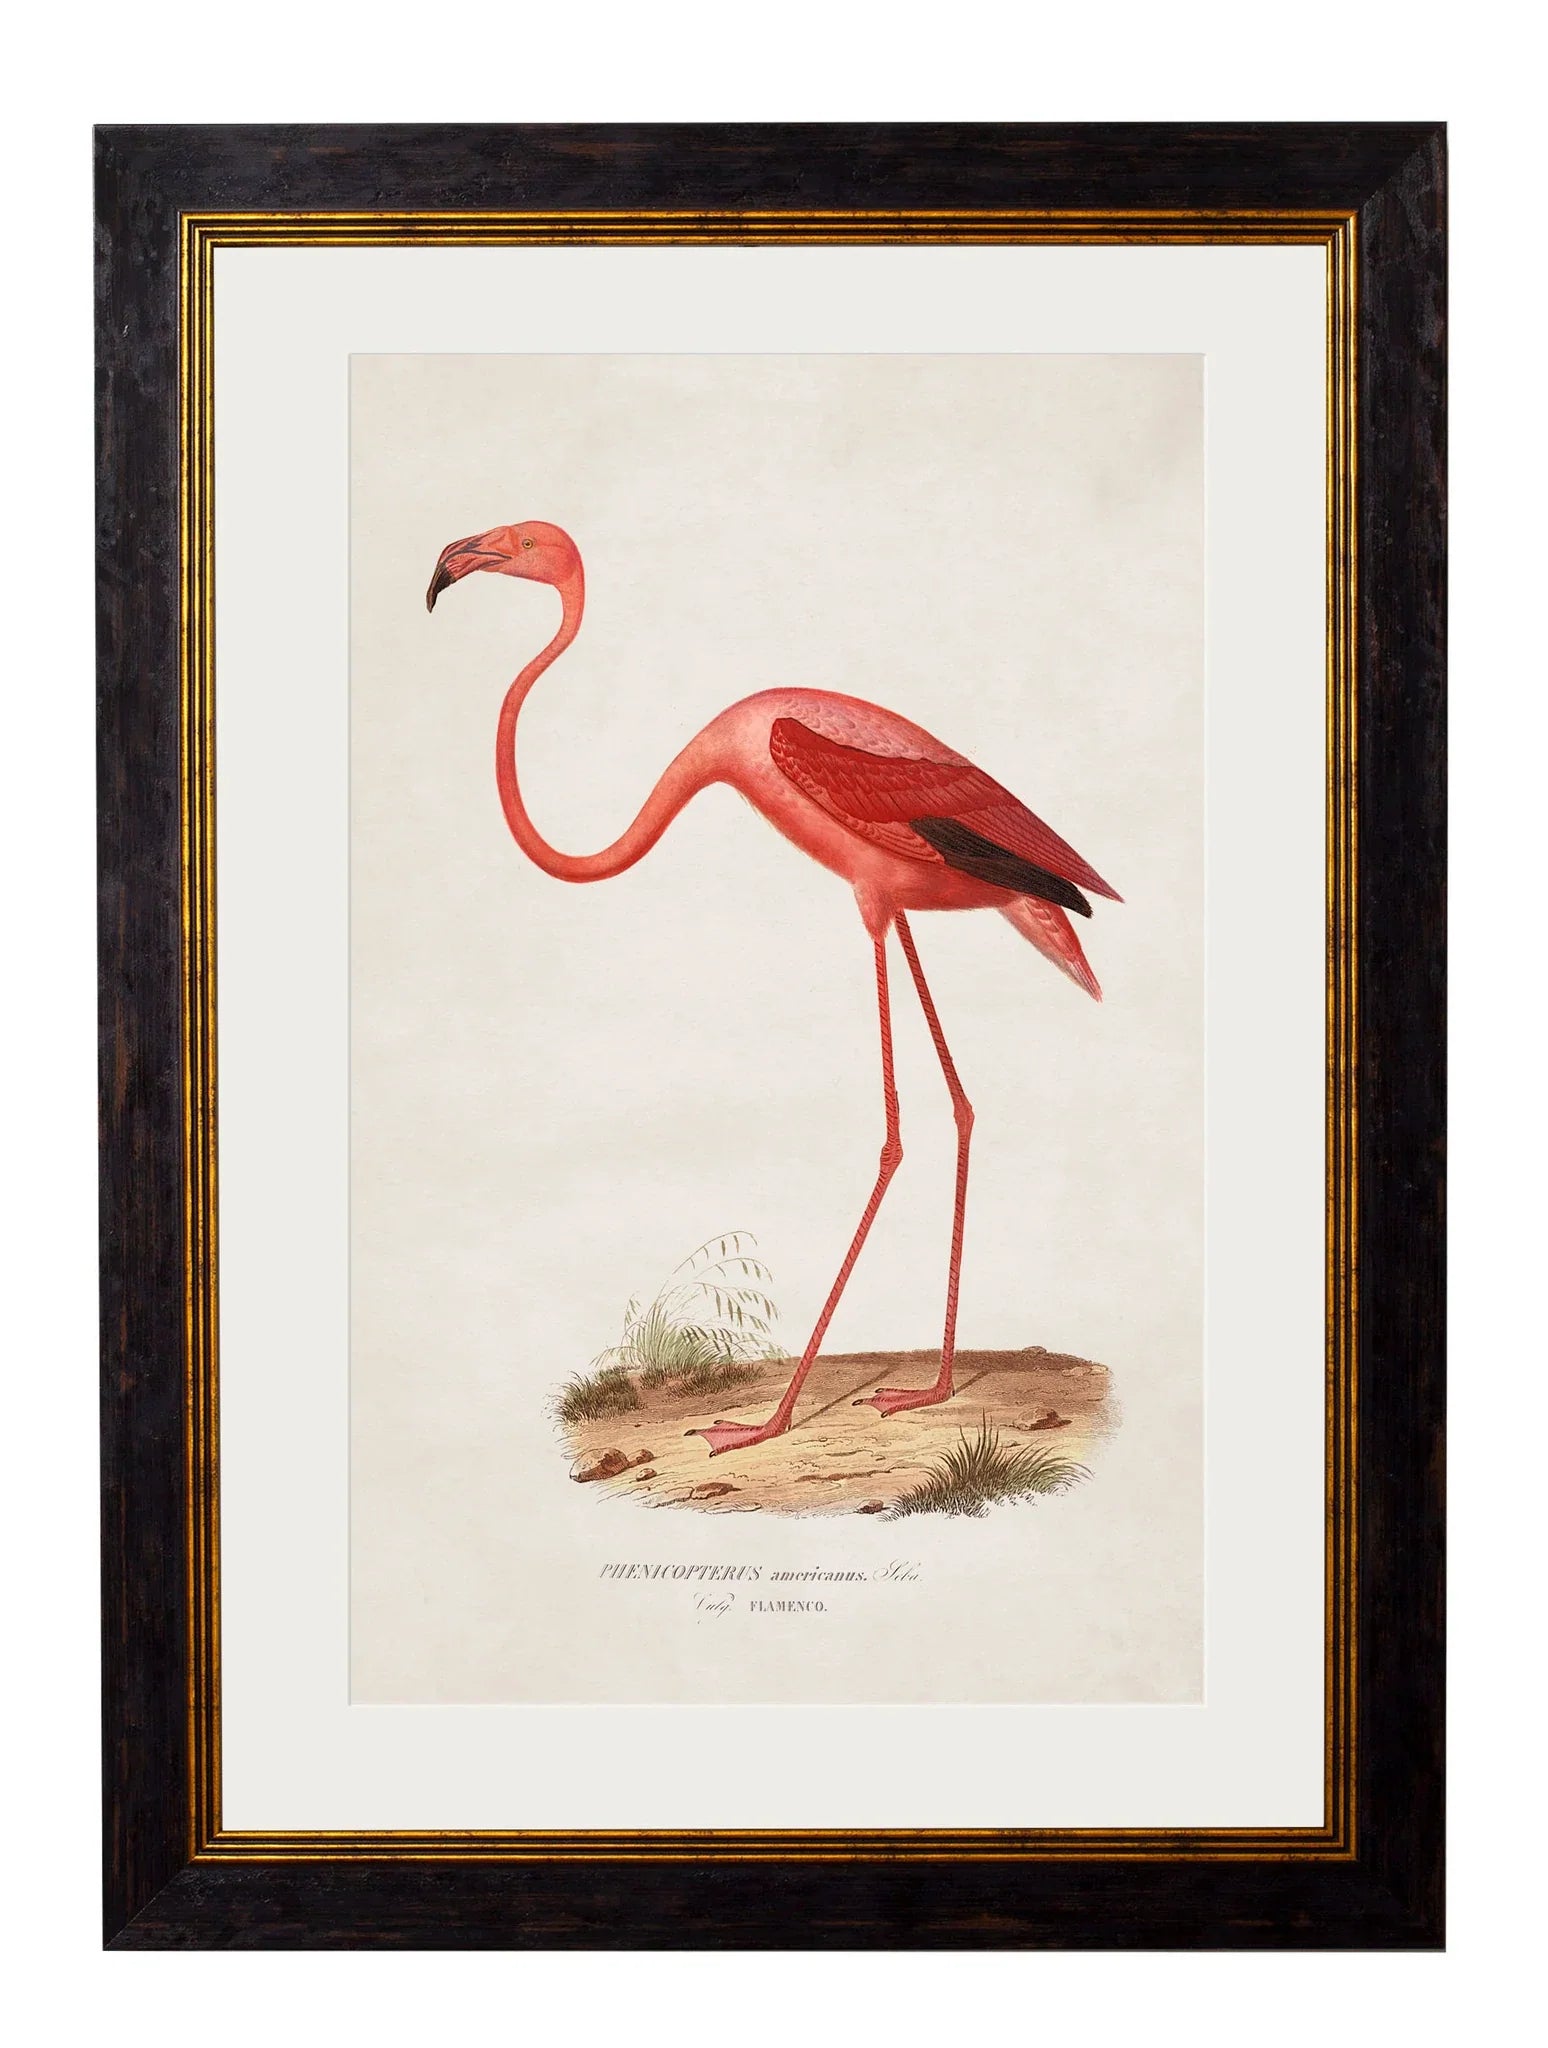 C.1830 Flamingo Frame for sale - Woodcock and Cavendish